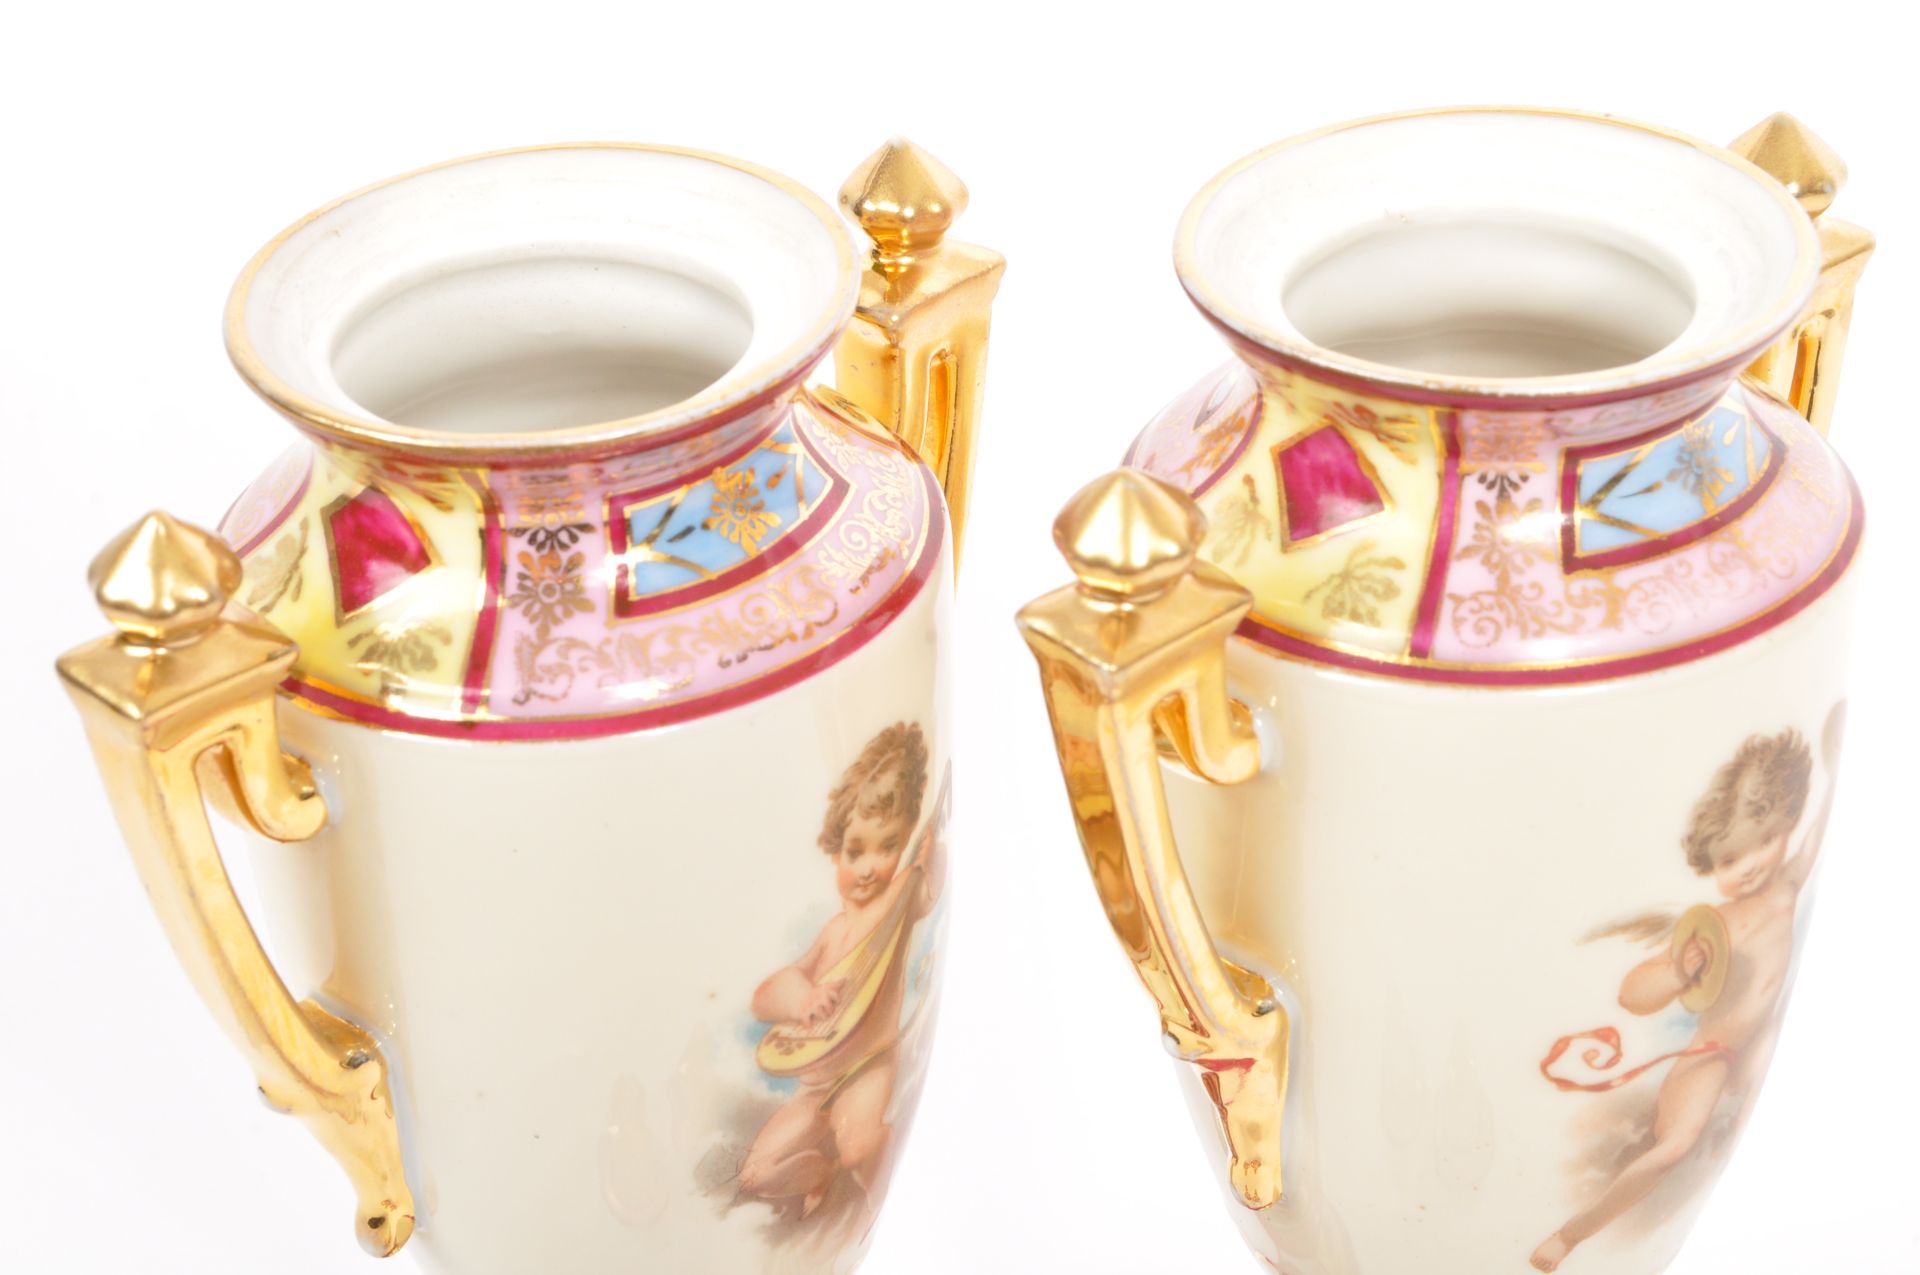 PAIR OF ANTIQUE GILDED GERMAN / AUSTRIAN TWIN HANDLED VASES - Image 5 of 8